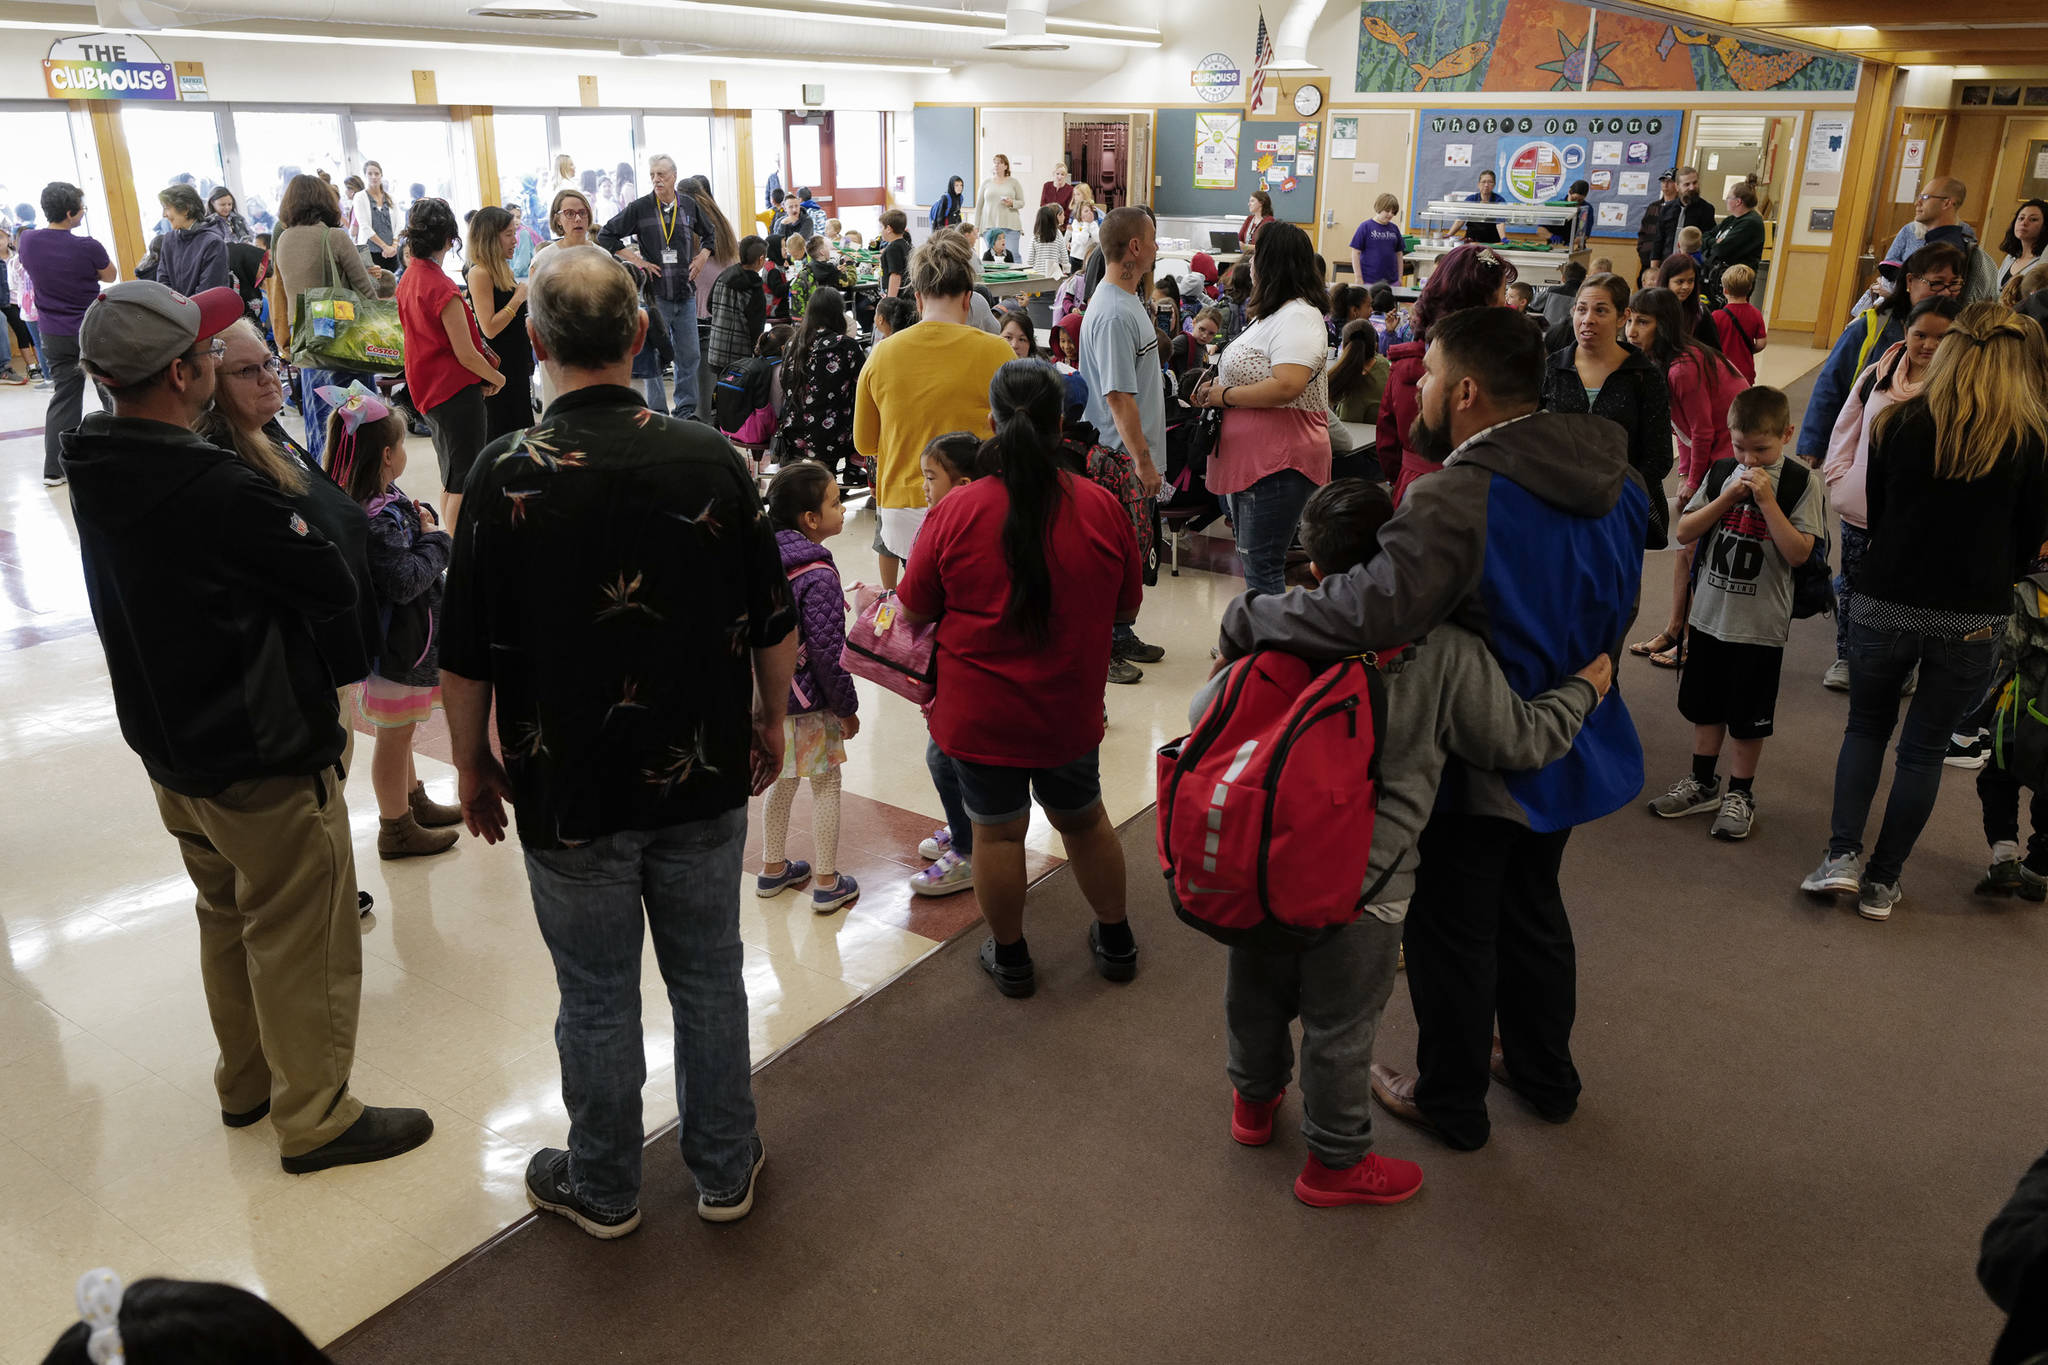 Teachers, parents and students gather at of Riverbend Elementary School on the first day of school on Monday, Aug. 19, 2019. (Michael Penn | Juneau Empire)